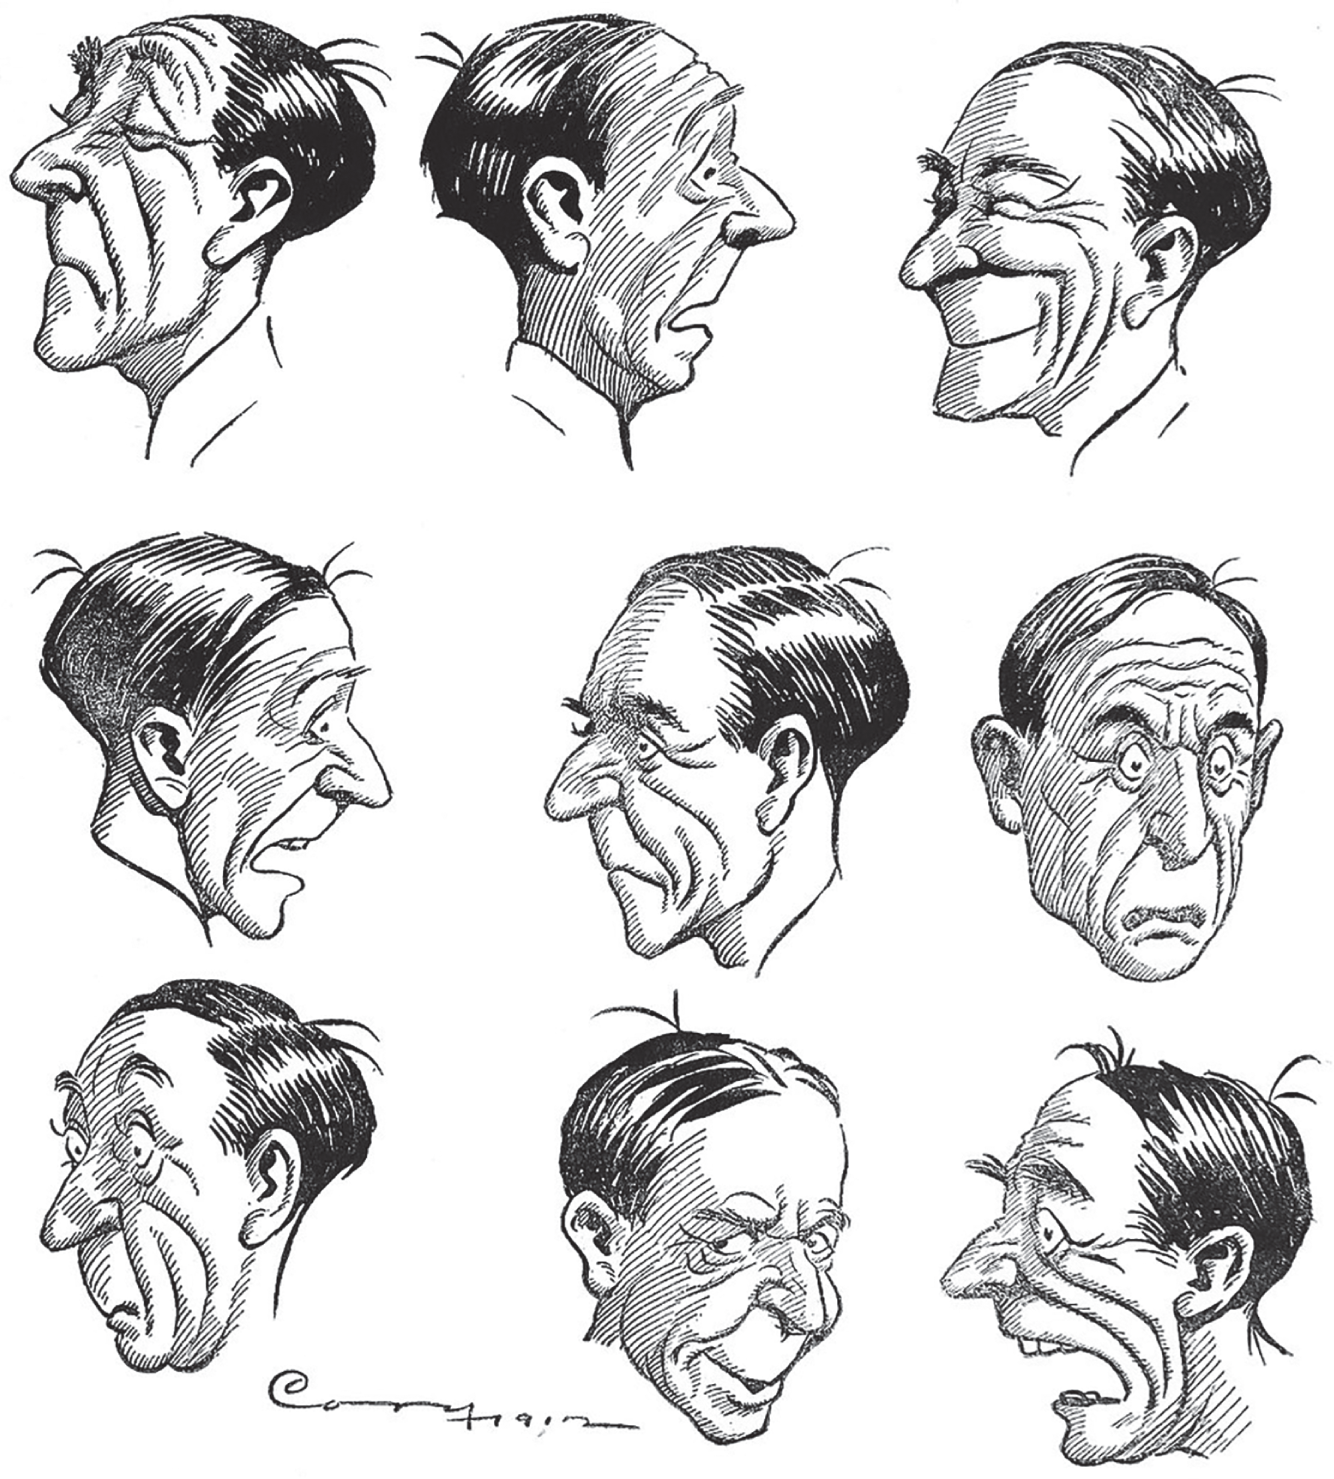 Cartoon illustration depicting nine types of facial expressions of a person's emotions.